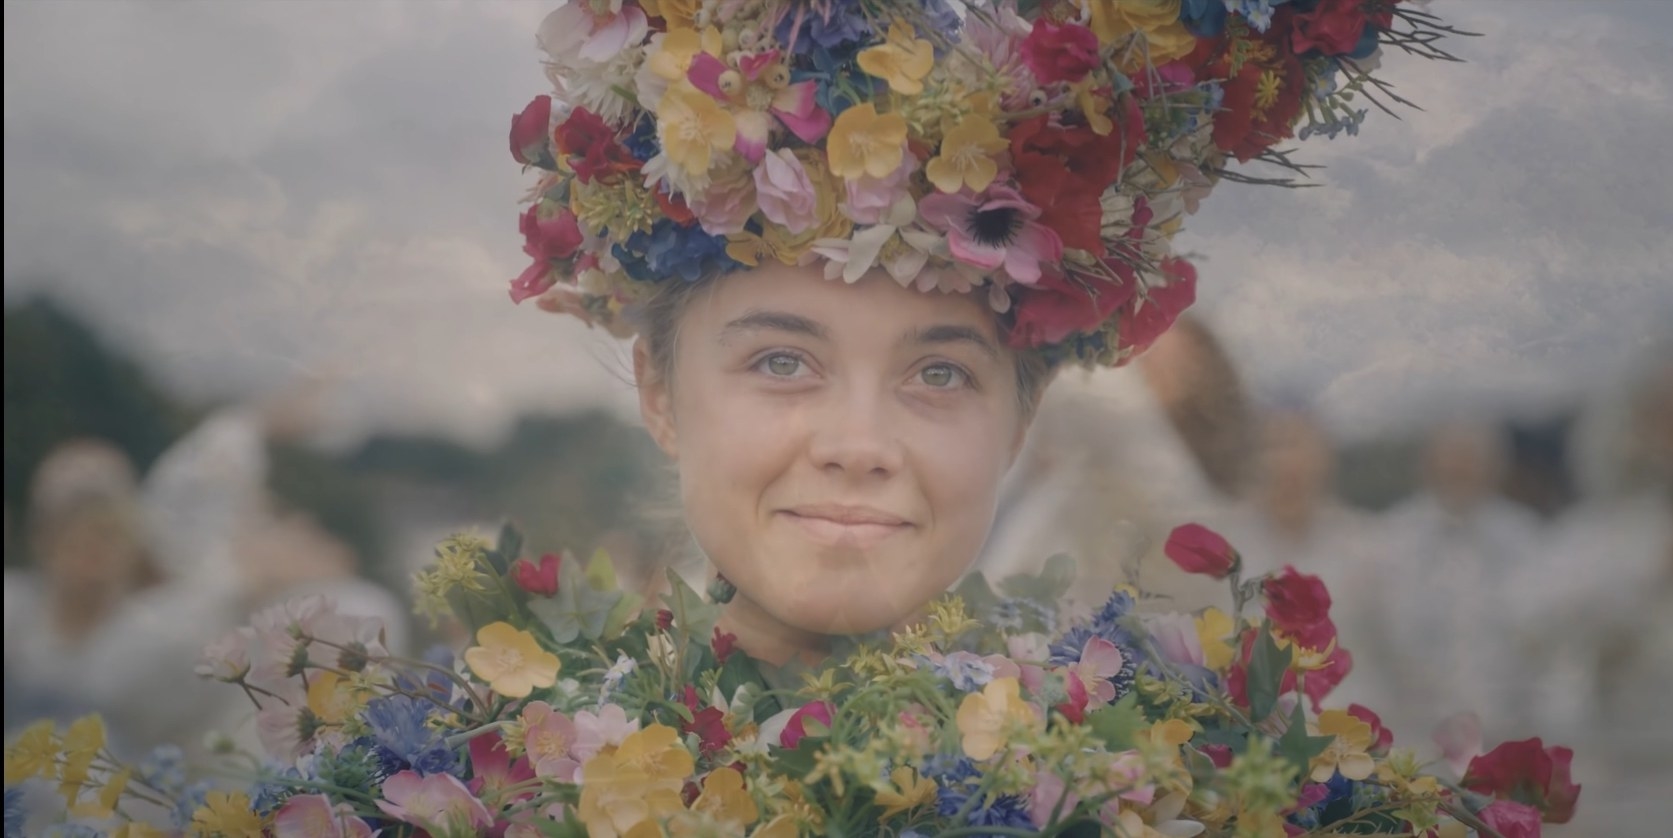 A smiling Florence Pugh sits in an ornate costume full of flowers